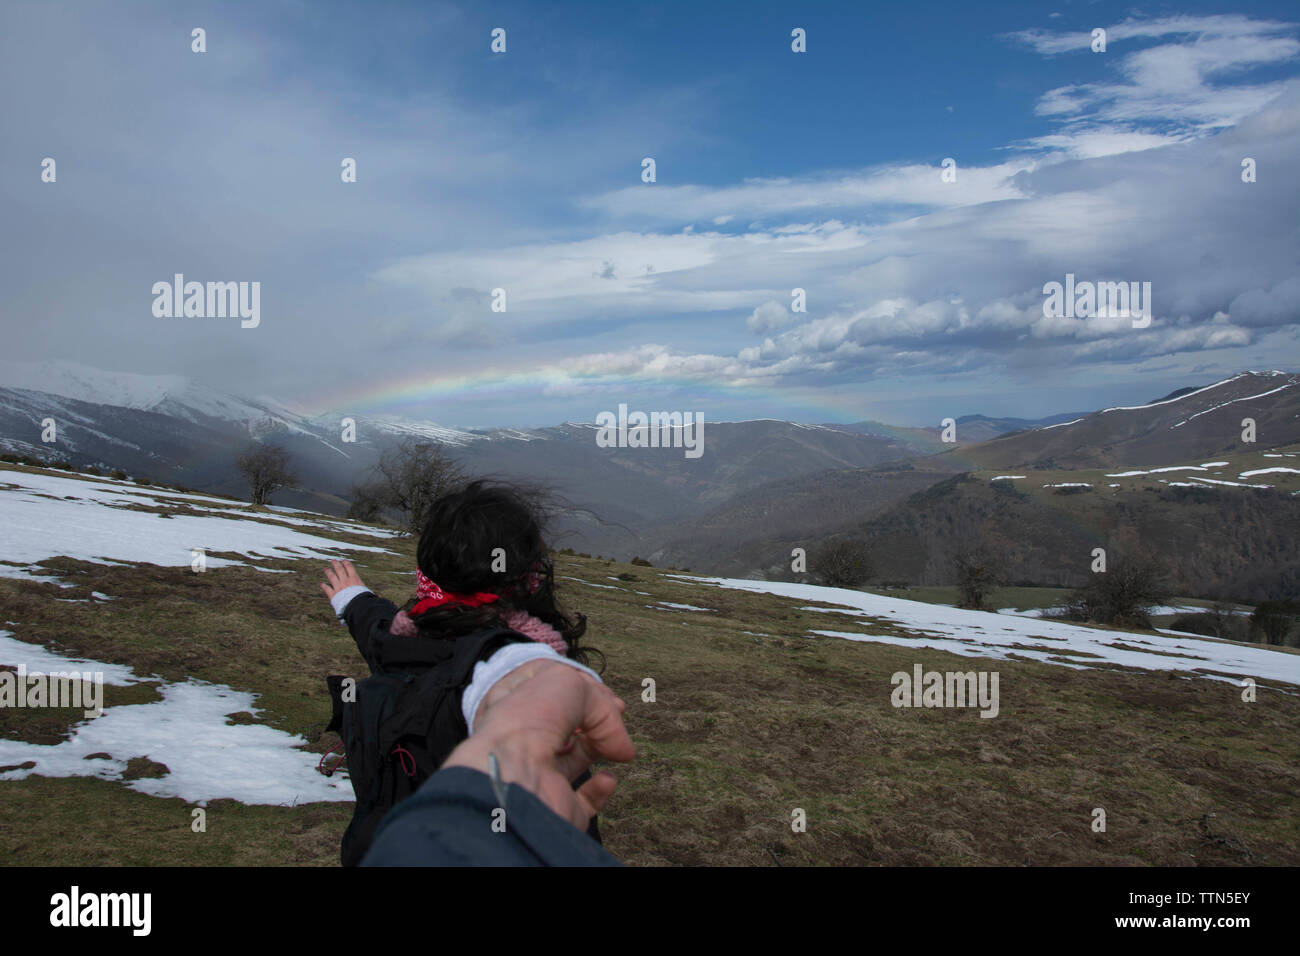 Cropped image of friend holding woman's hand against mountains and rainbow during winter Stock Photo